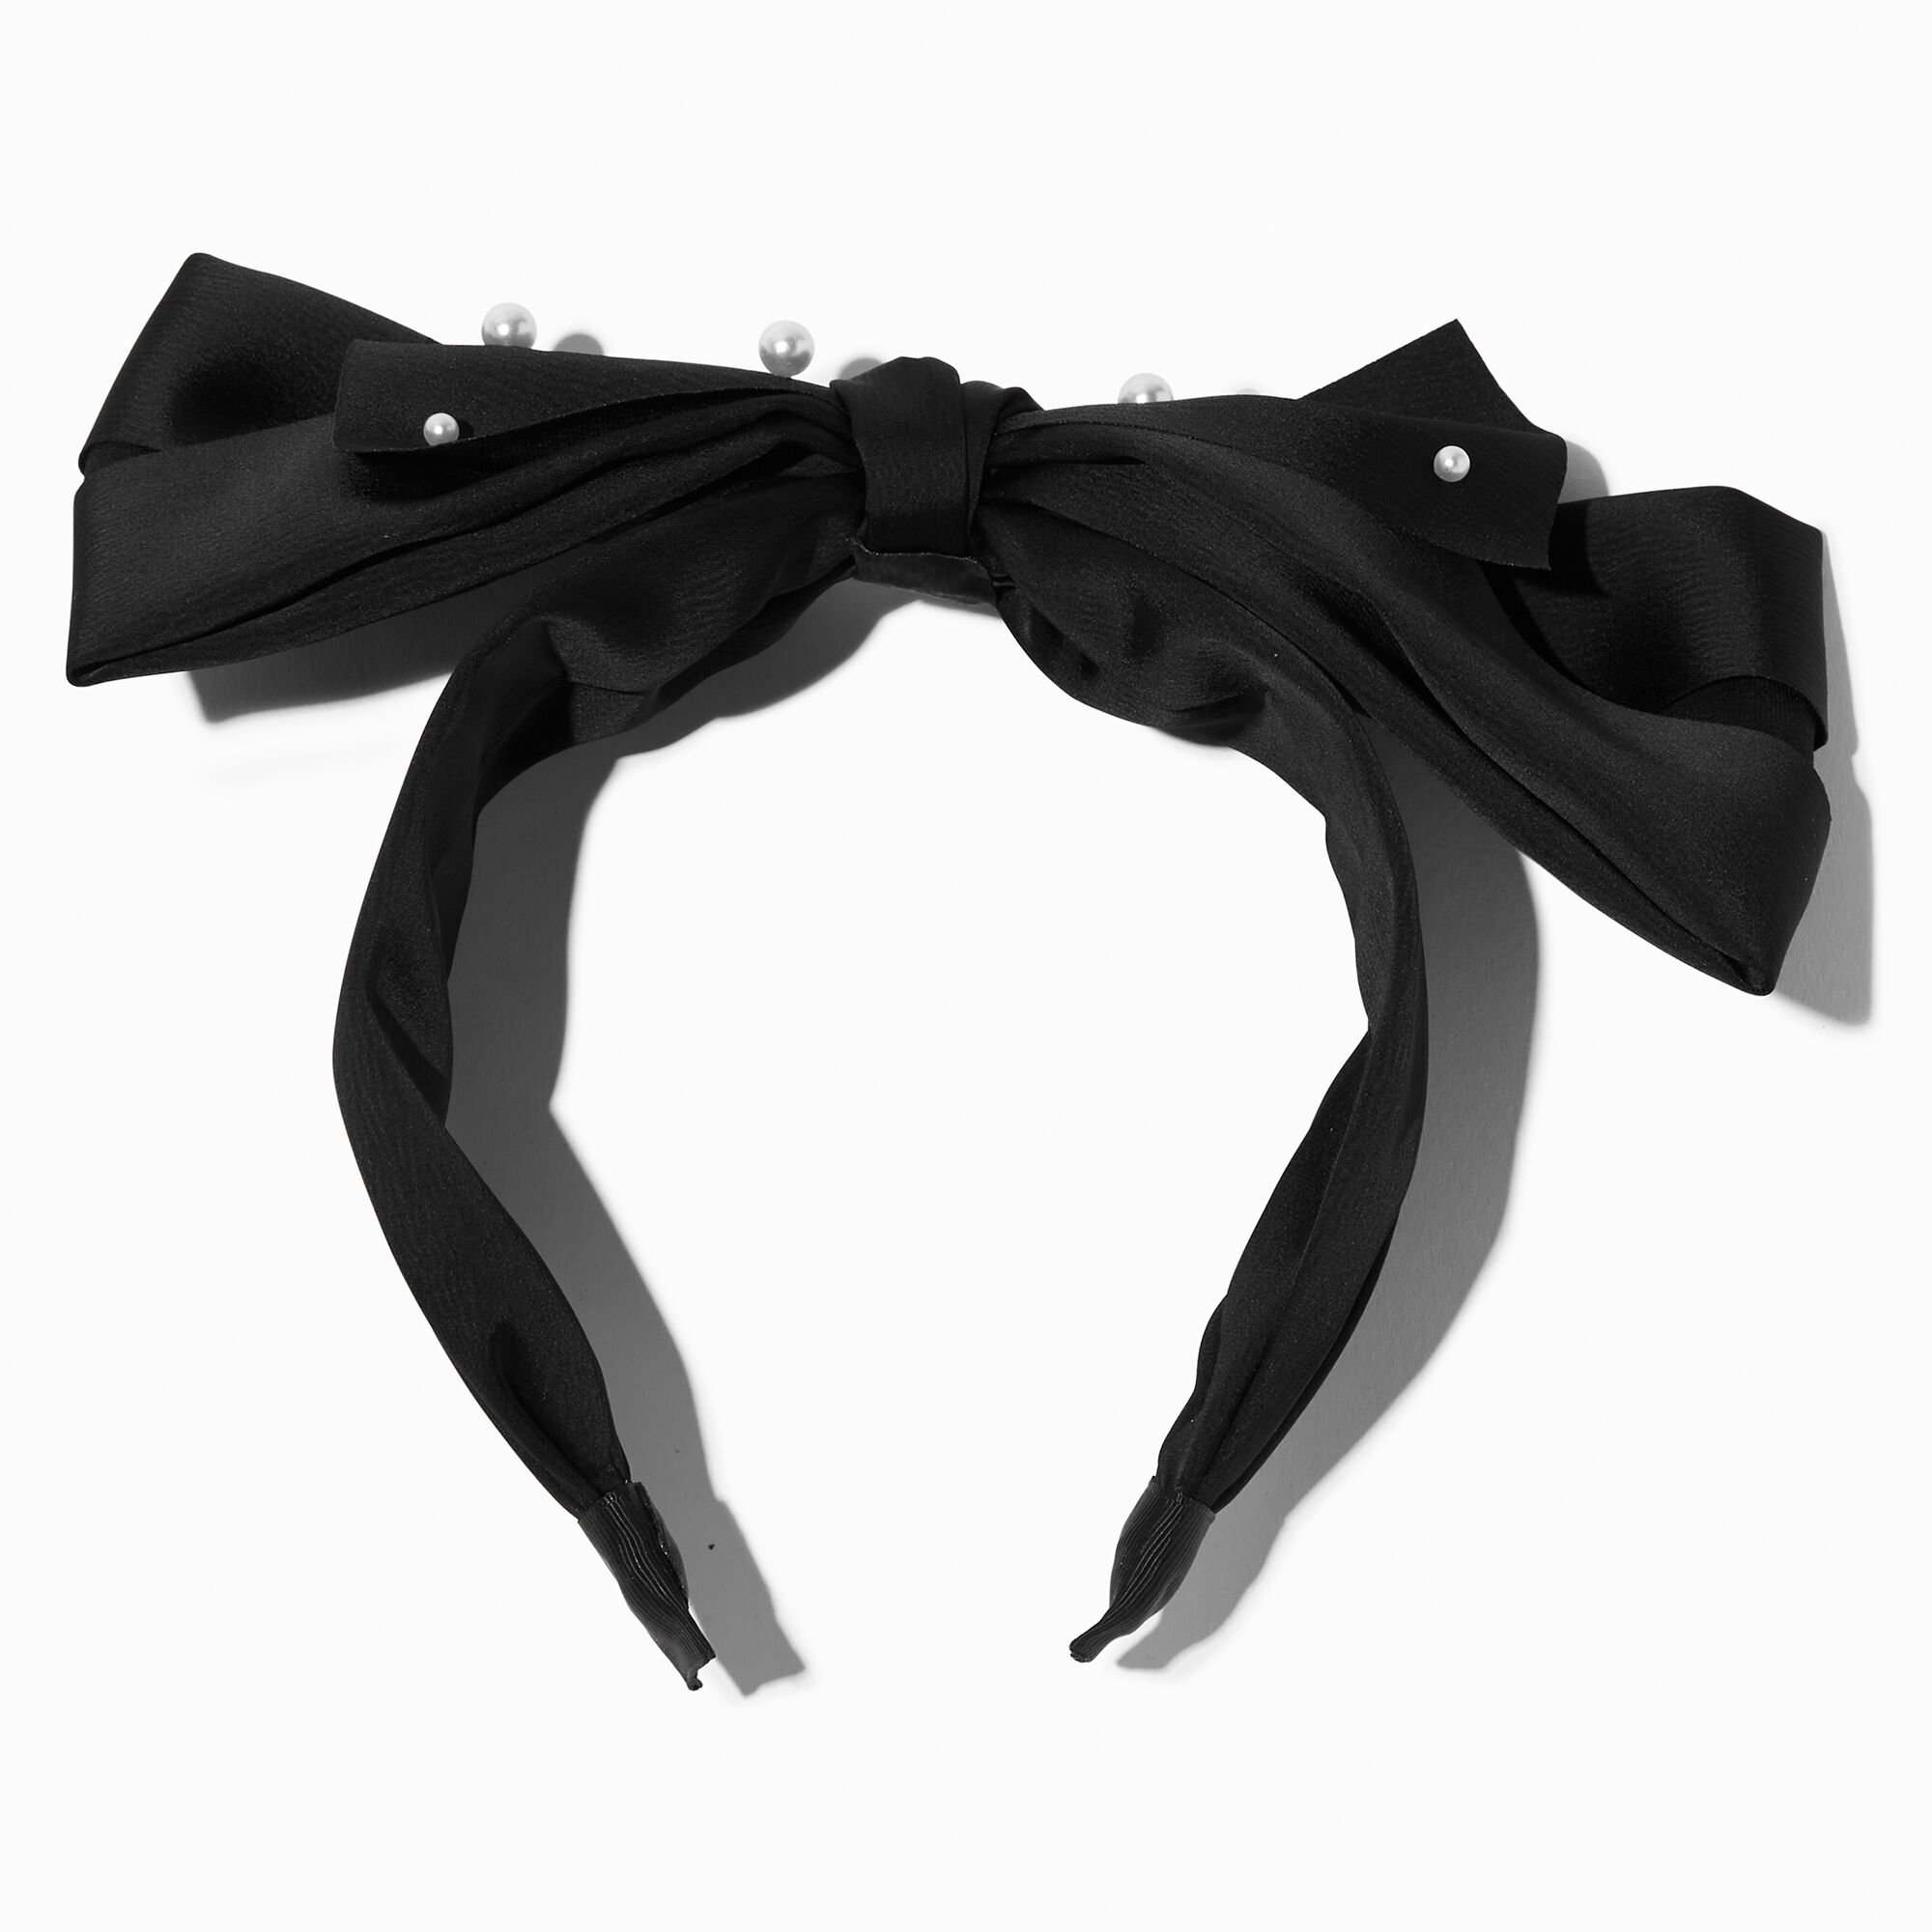 View Claires Pearl Large Knotted Bow Headband Black information